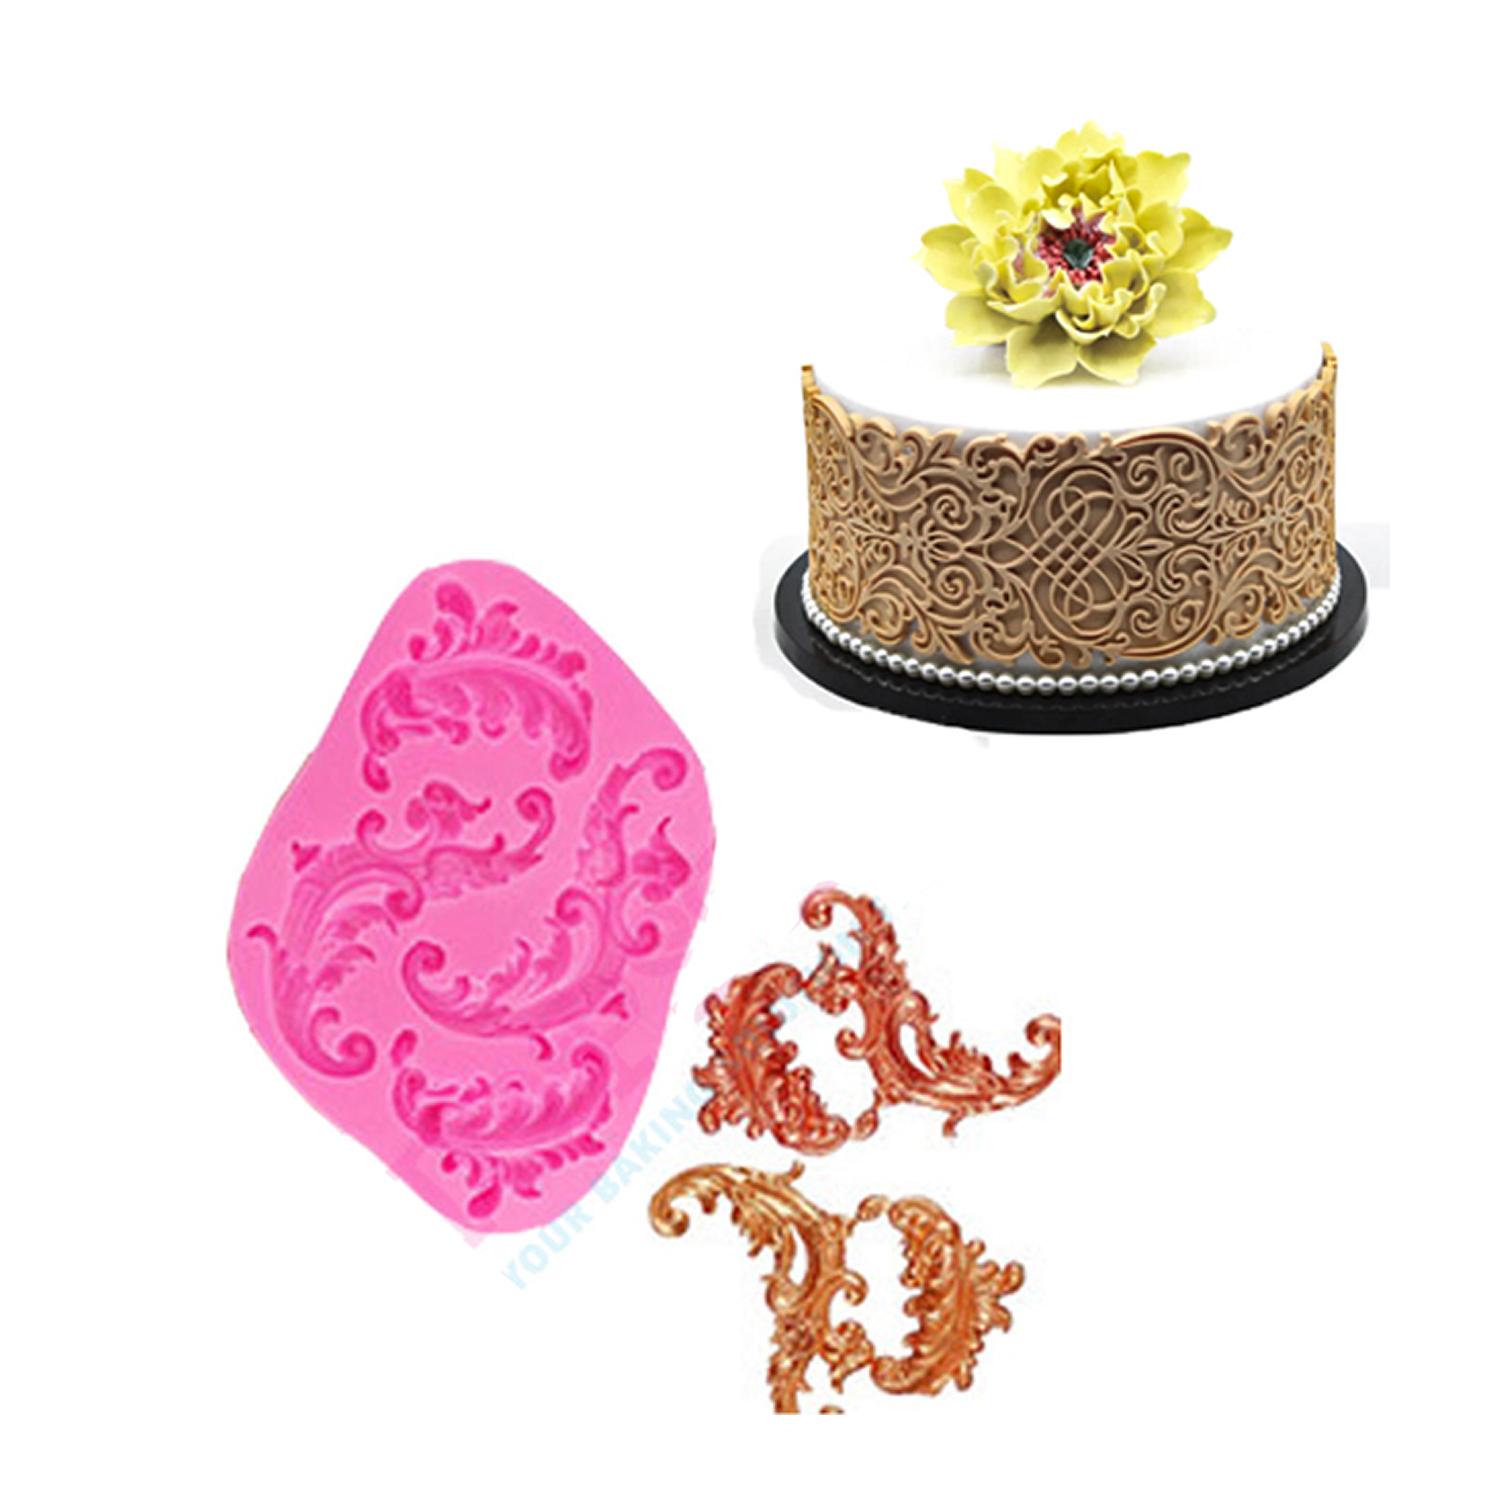 SFGM0142 EMBOSSED PATTERN LACE CAKE BORDER SILICON MOLDS